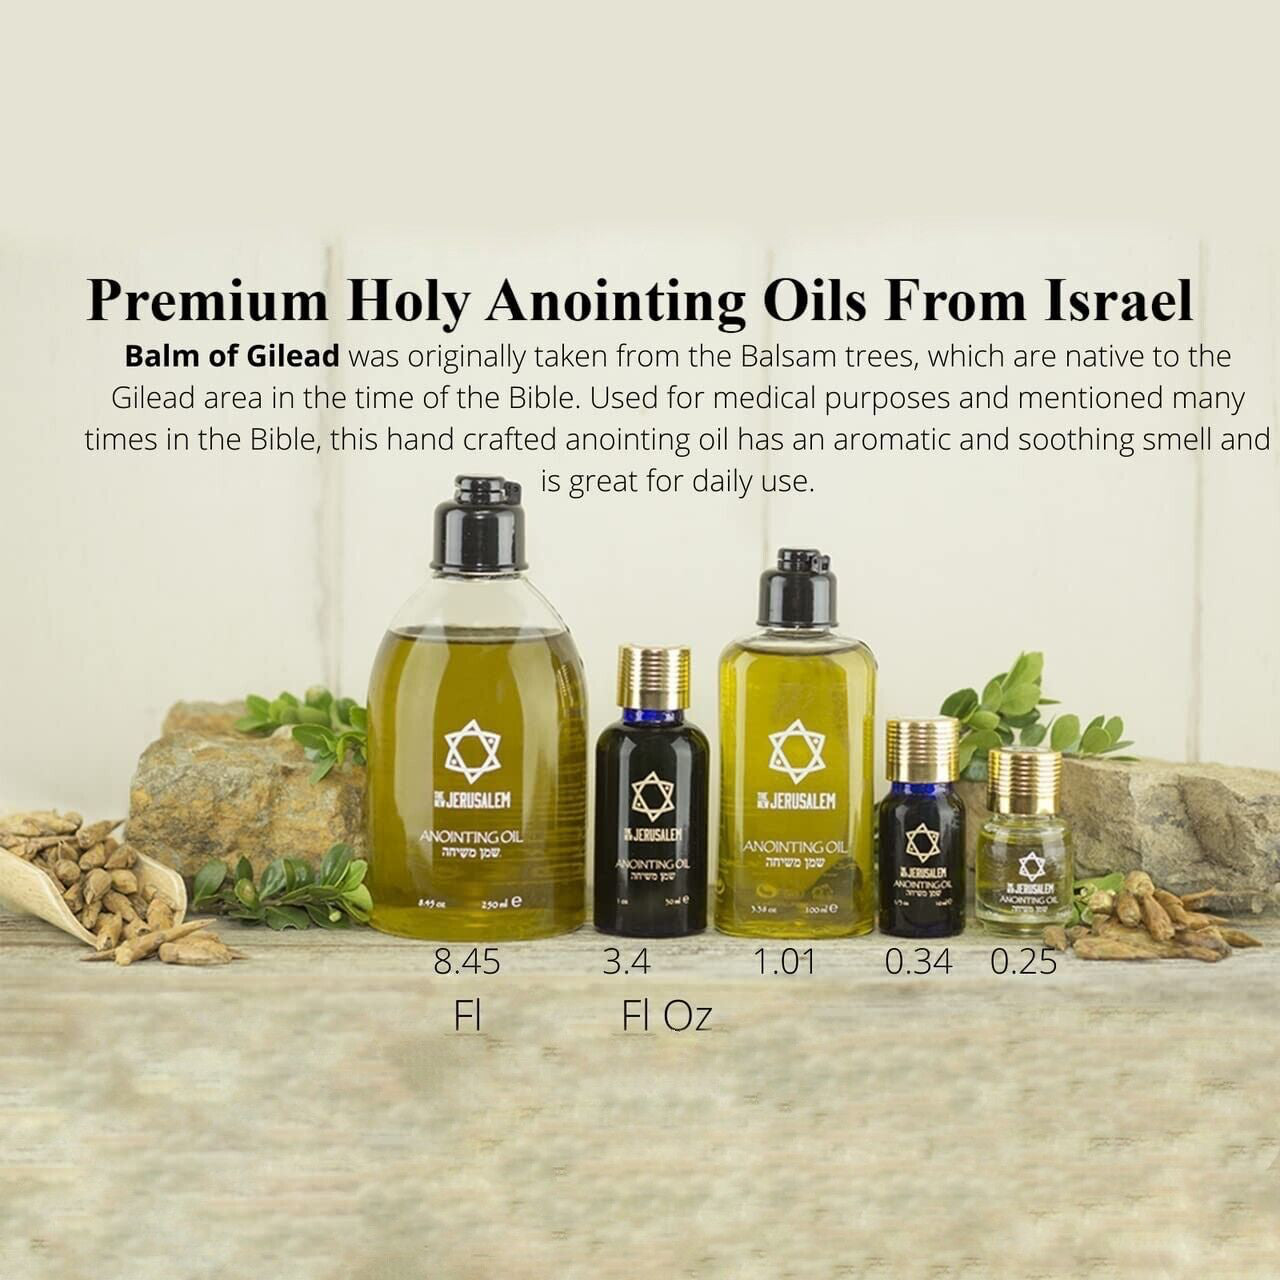 Anointing Oil Prince of Peace Fragrance 250ml. From Holyland Jerusalem